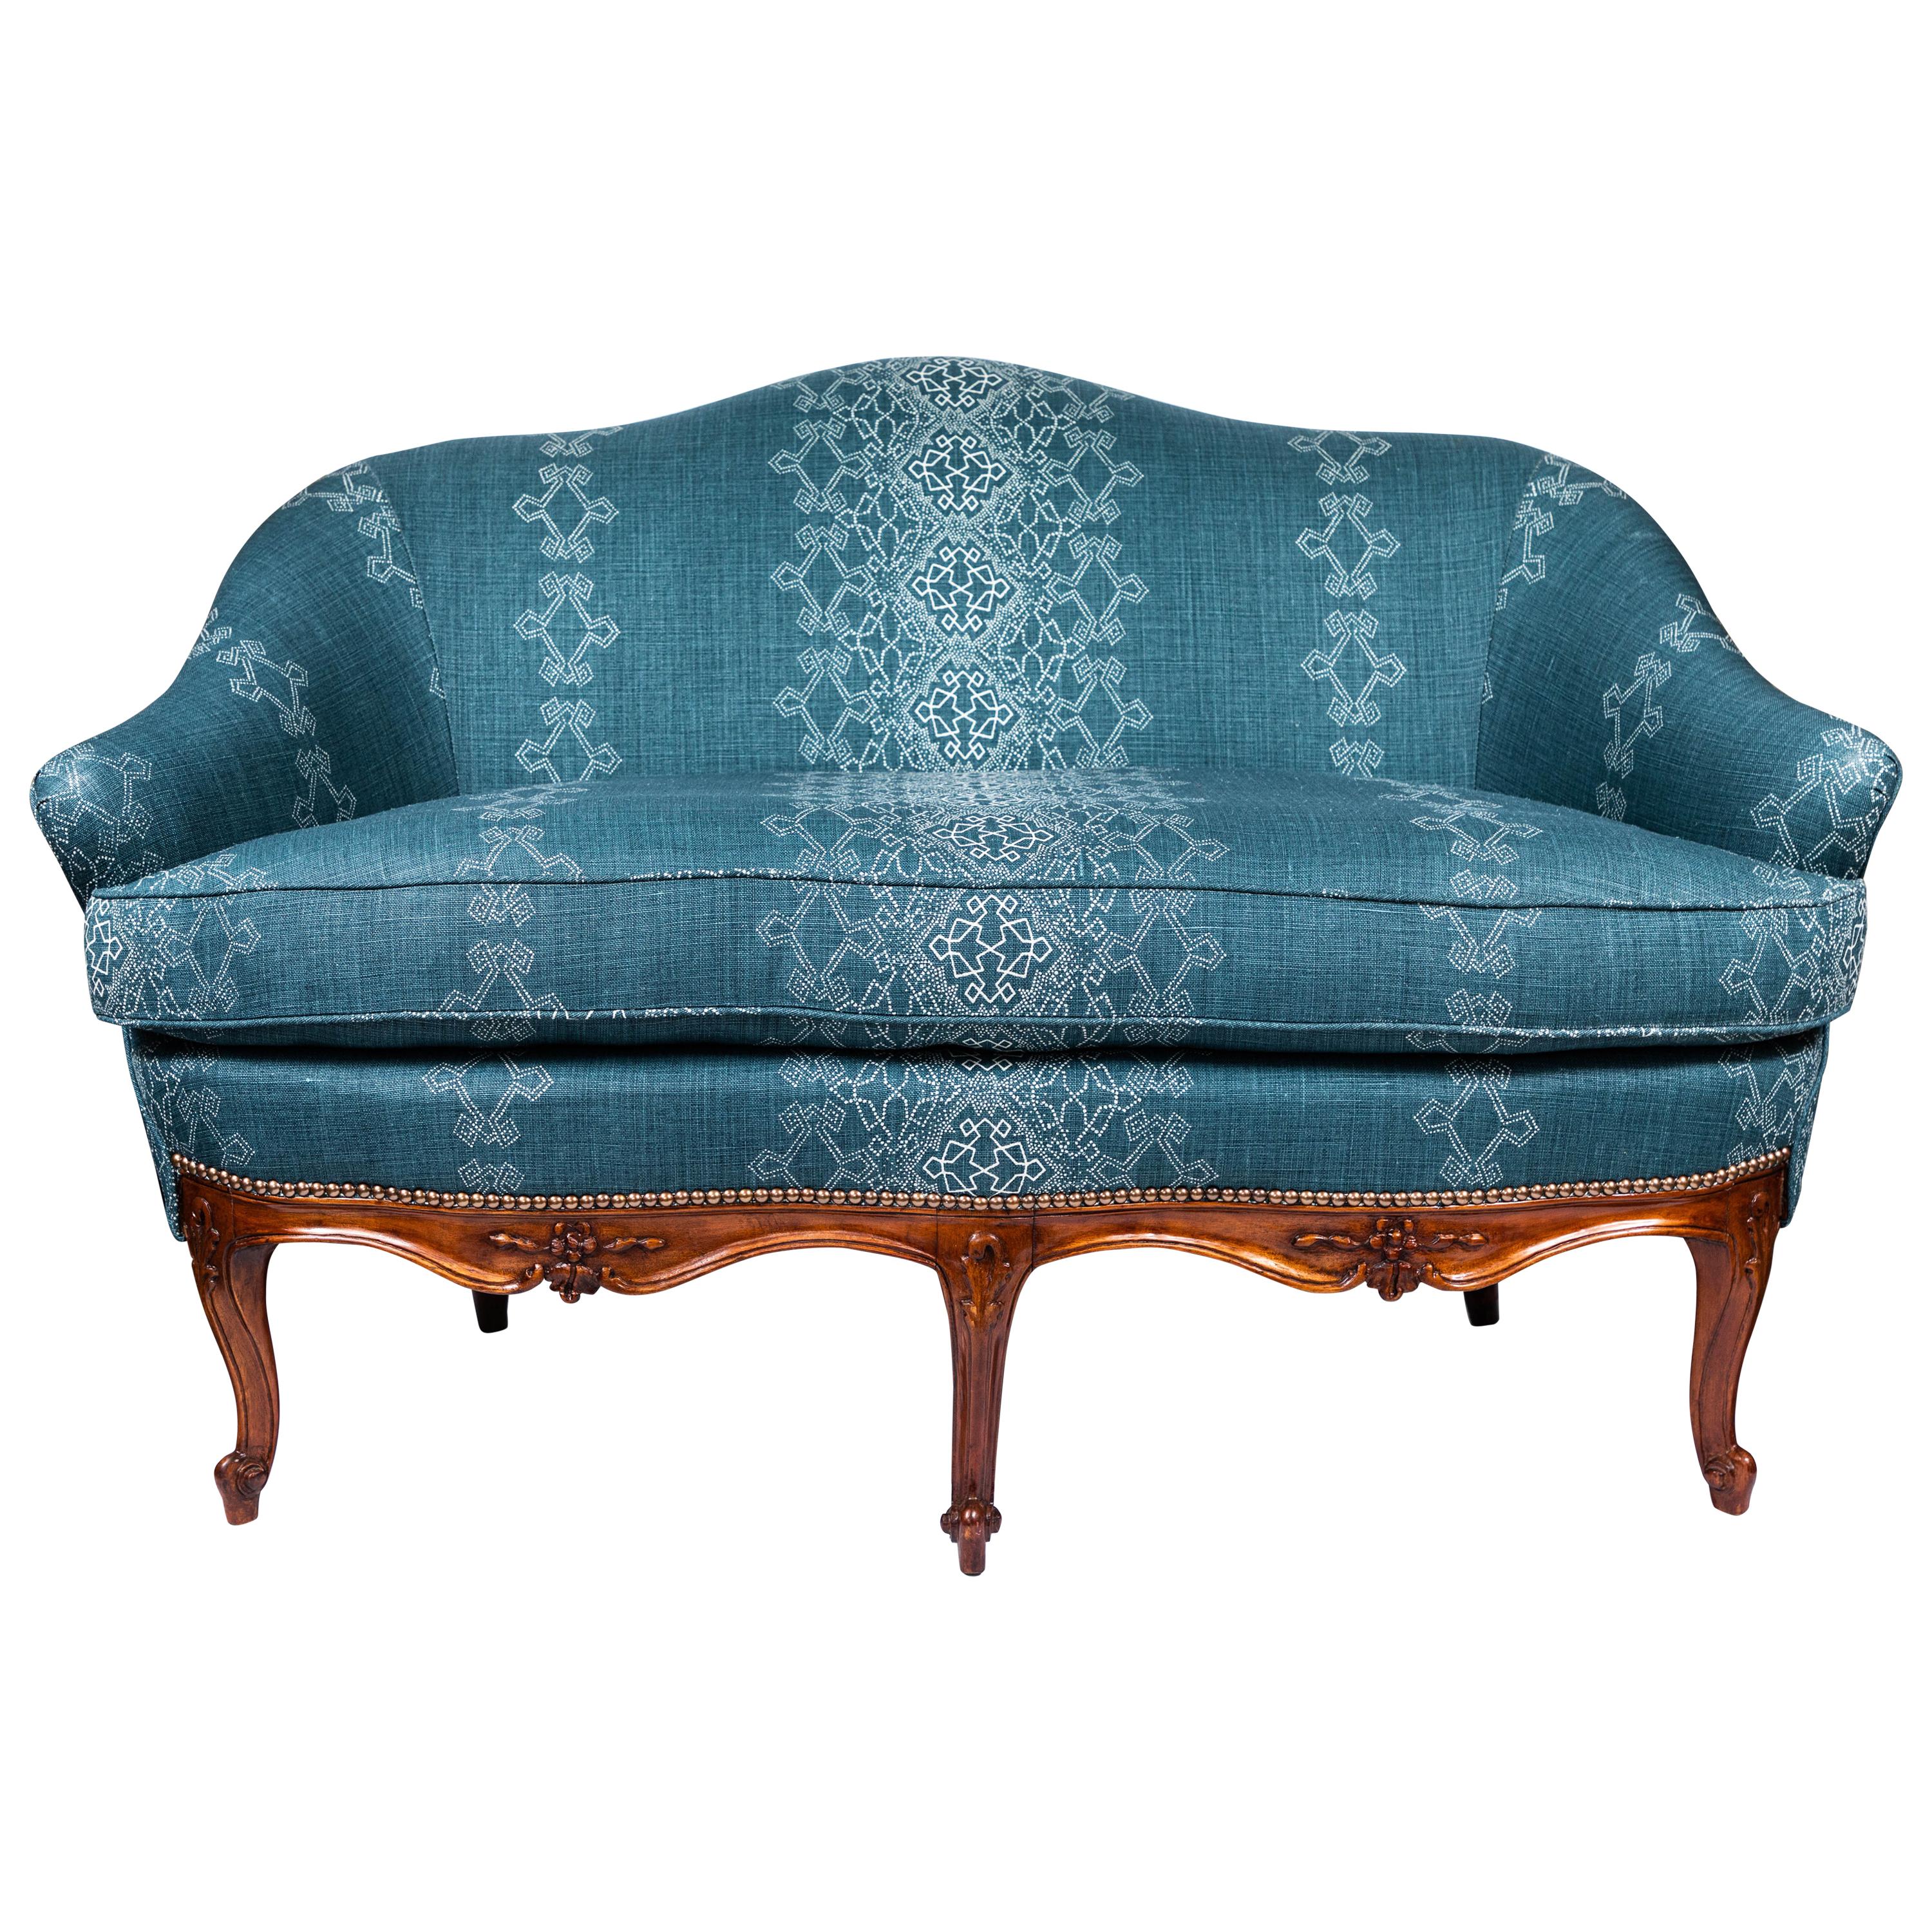 1940s Settee with Three Queen Anne Style Front Legs and Carvings